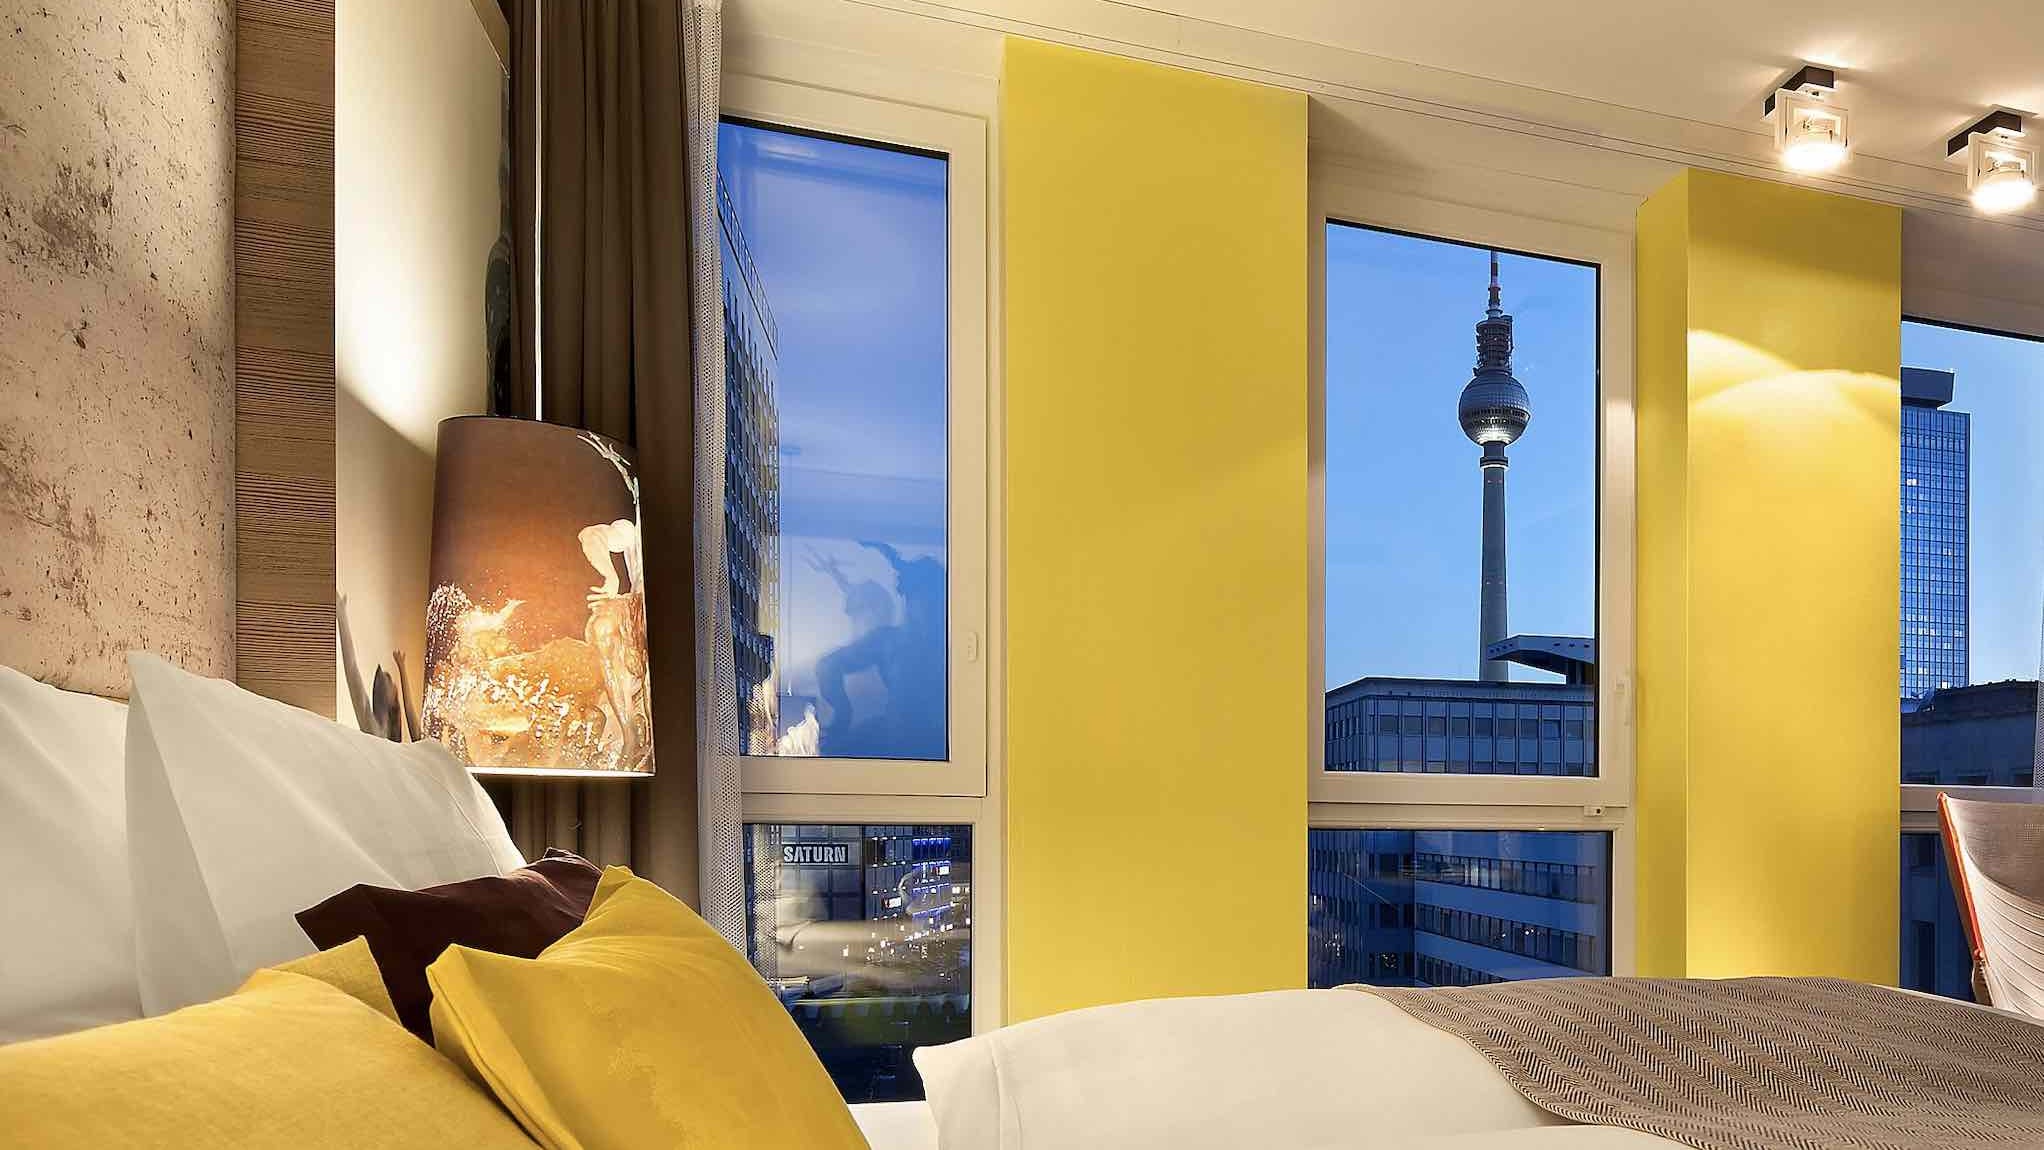 Hotel Indigo Berlin is located close to the city center and its top attractions (Photo courtesy Hotel Indigo Berlin - Centre Alexanderplatz)